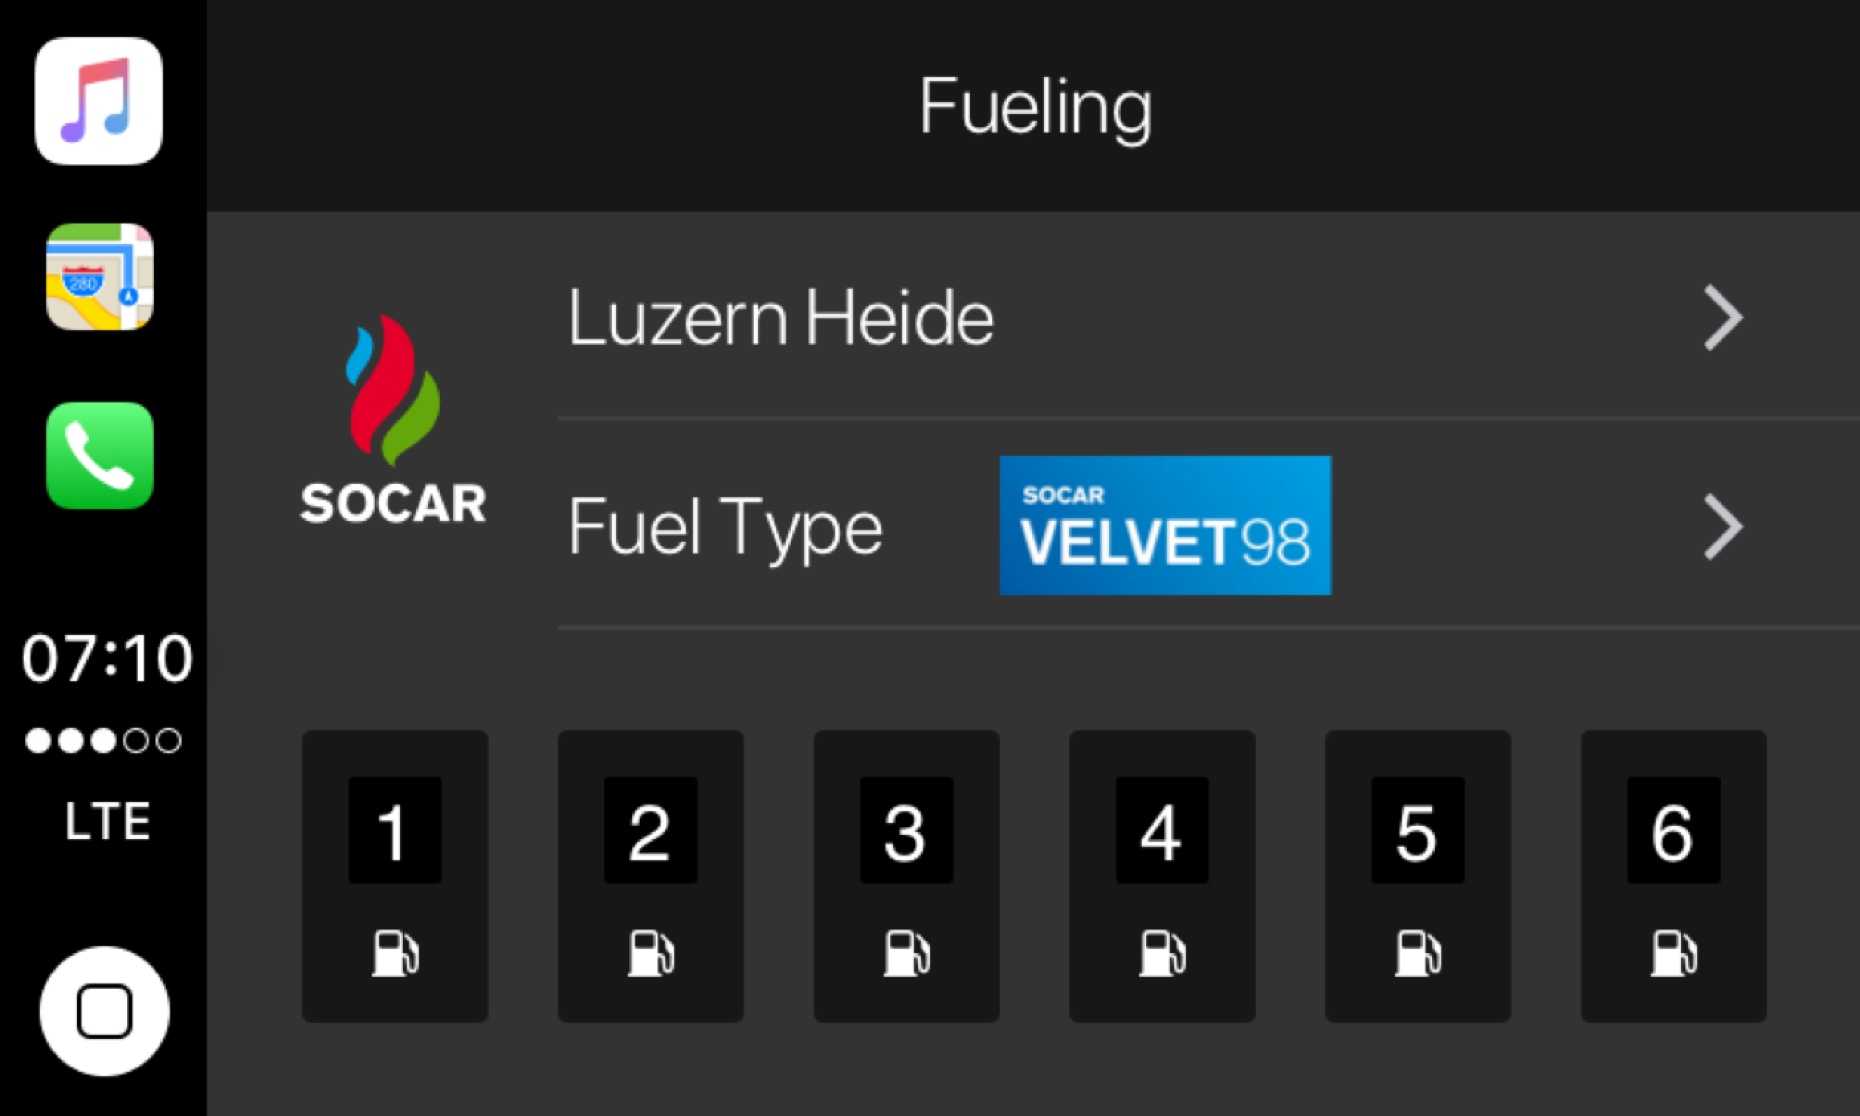 User interface options for selecting fueling details in car play app